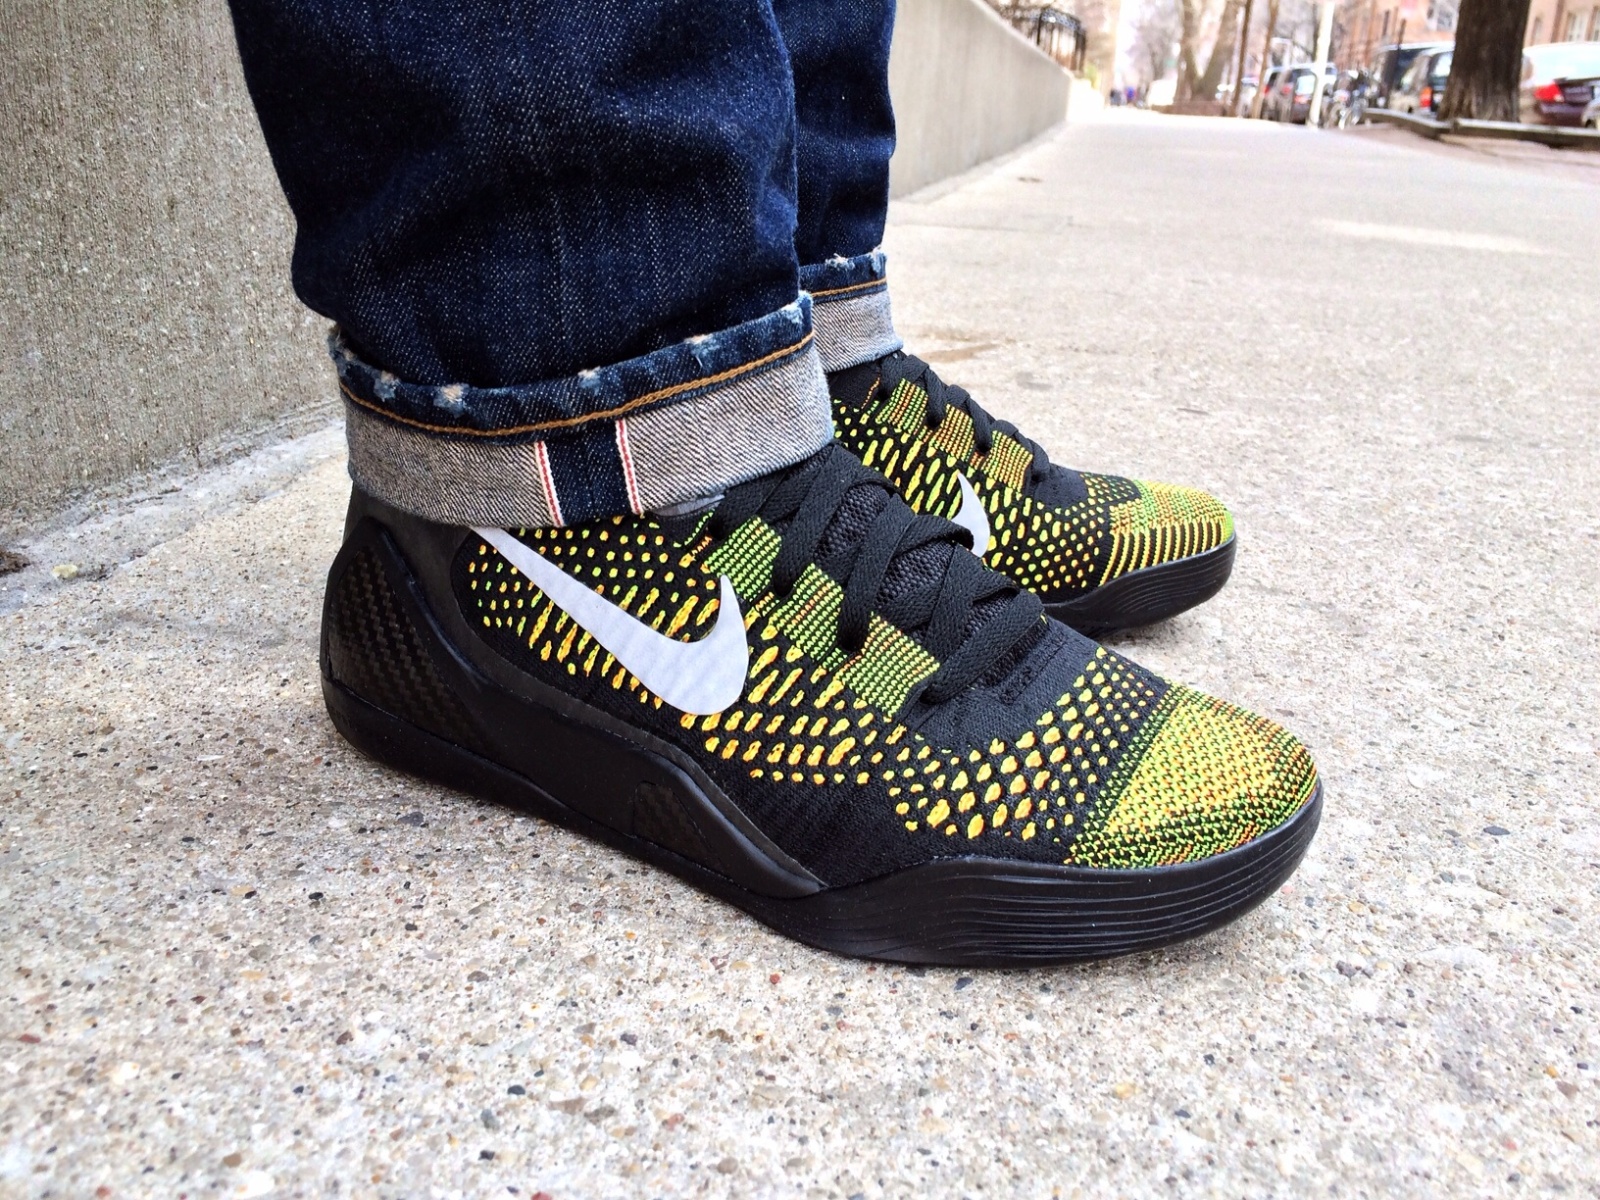 Sole Collector Spotlight // What Did You Wear Today? - 4.9.14 | Sole ...